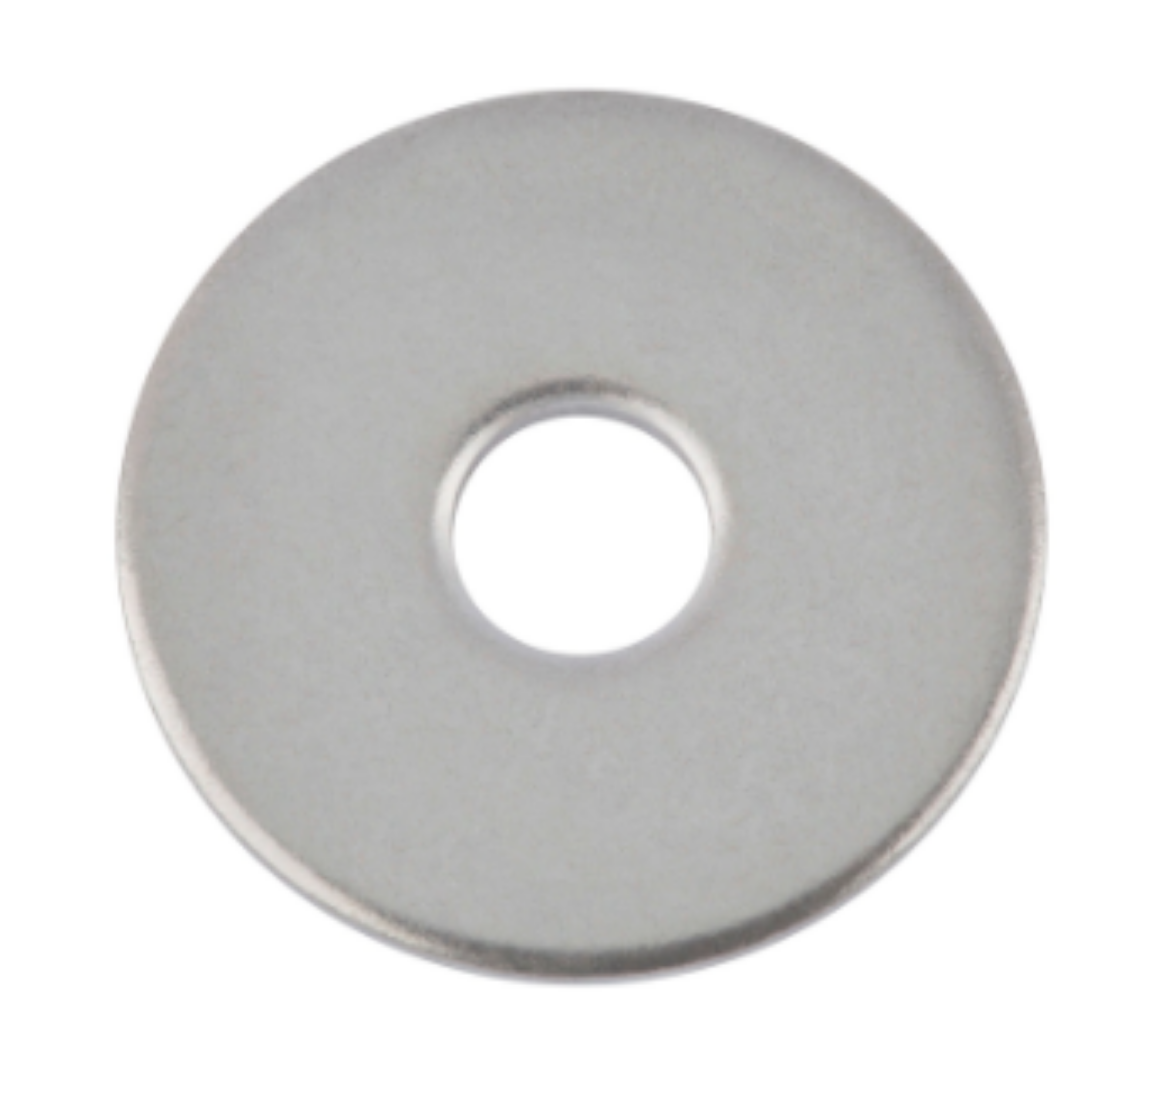 Picture of FENDER WASHER 1/4X1-1/4X16G ZINC